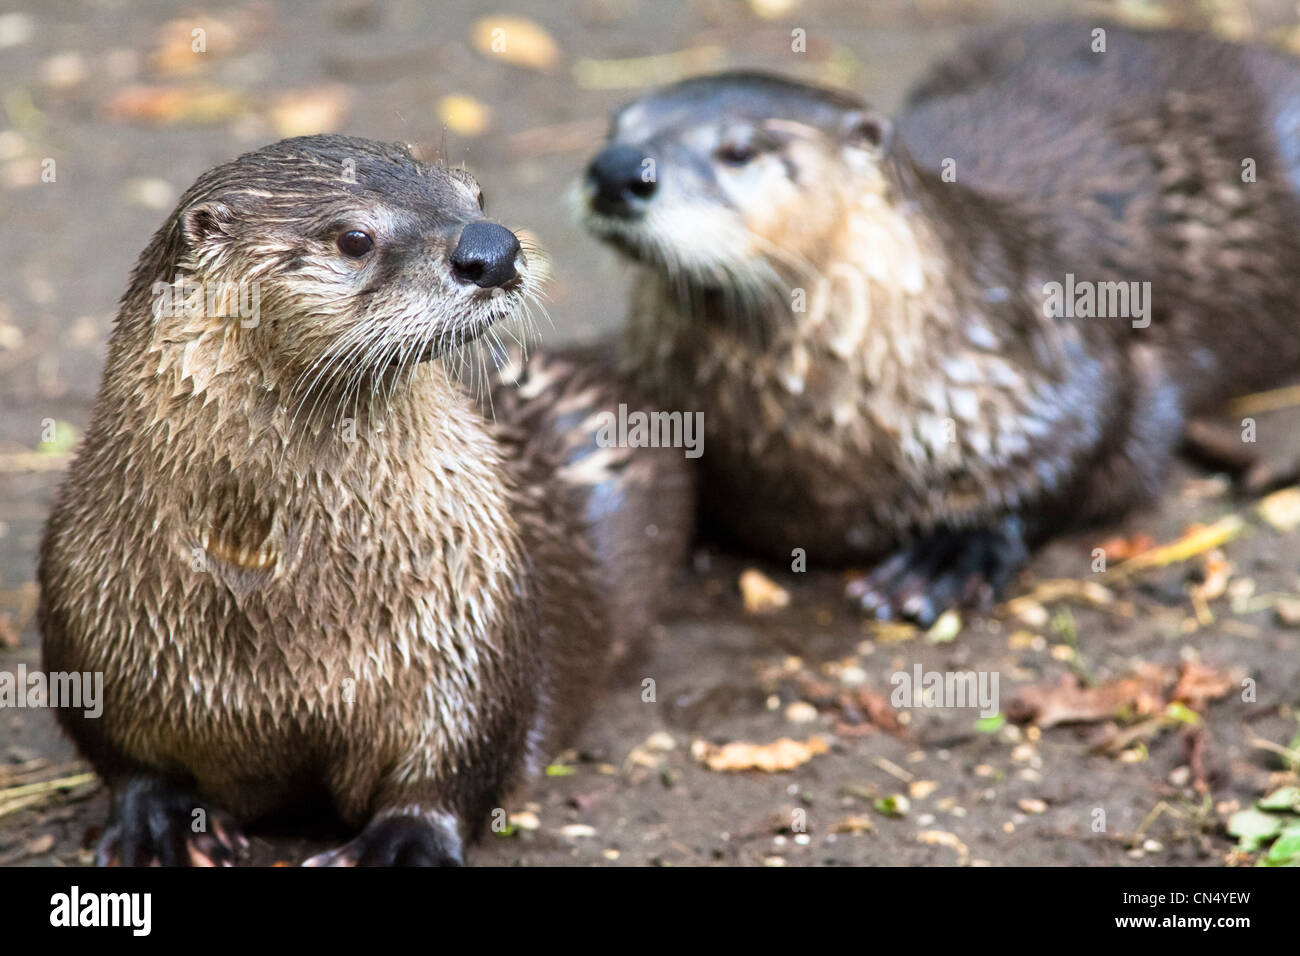 North American River Otter portrait - Lontra canadensis Banque D'Images